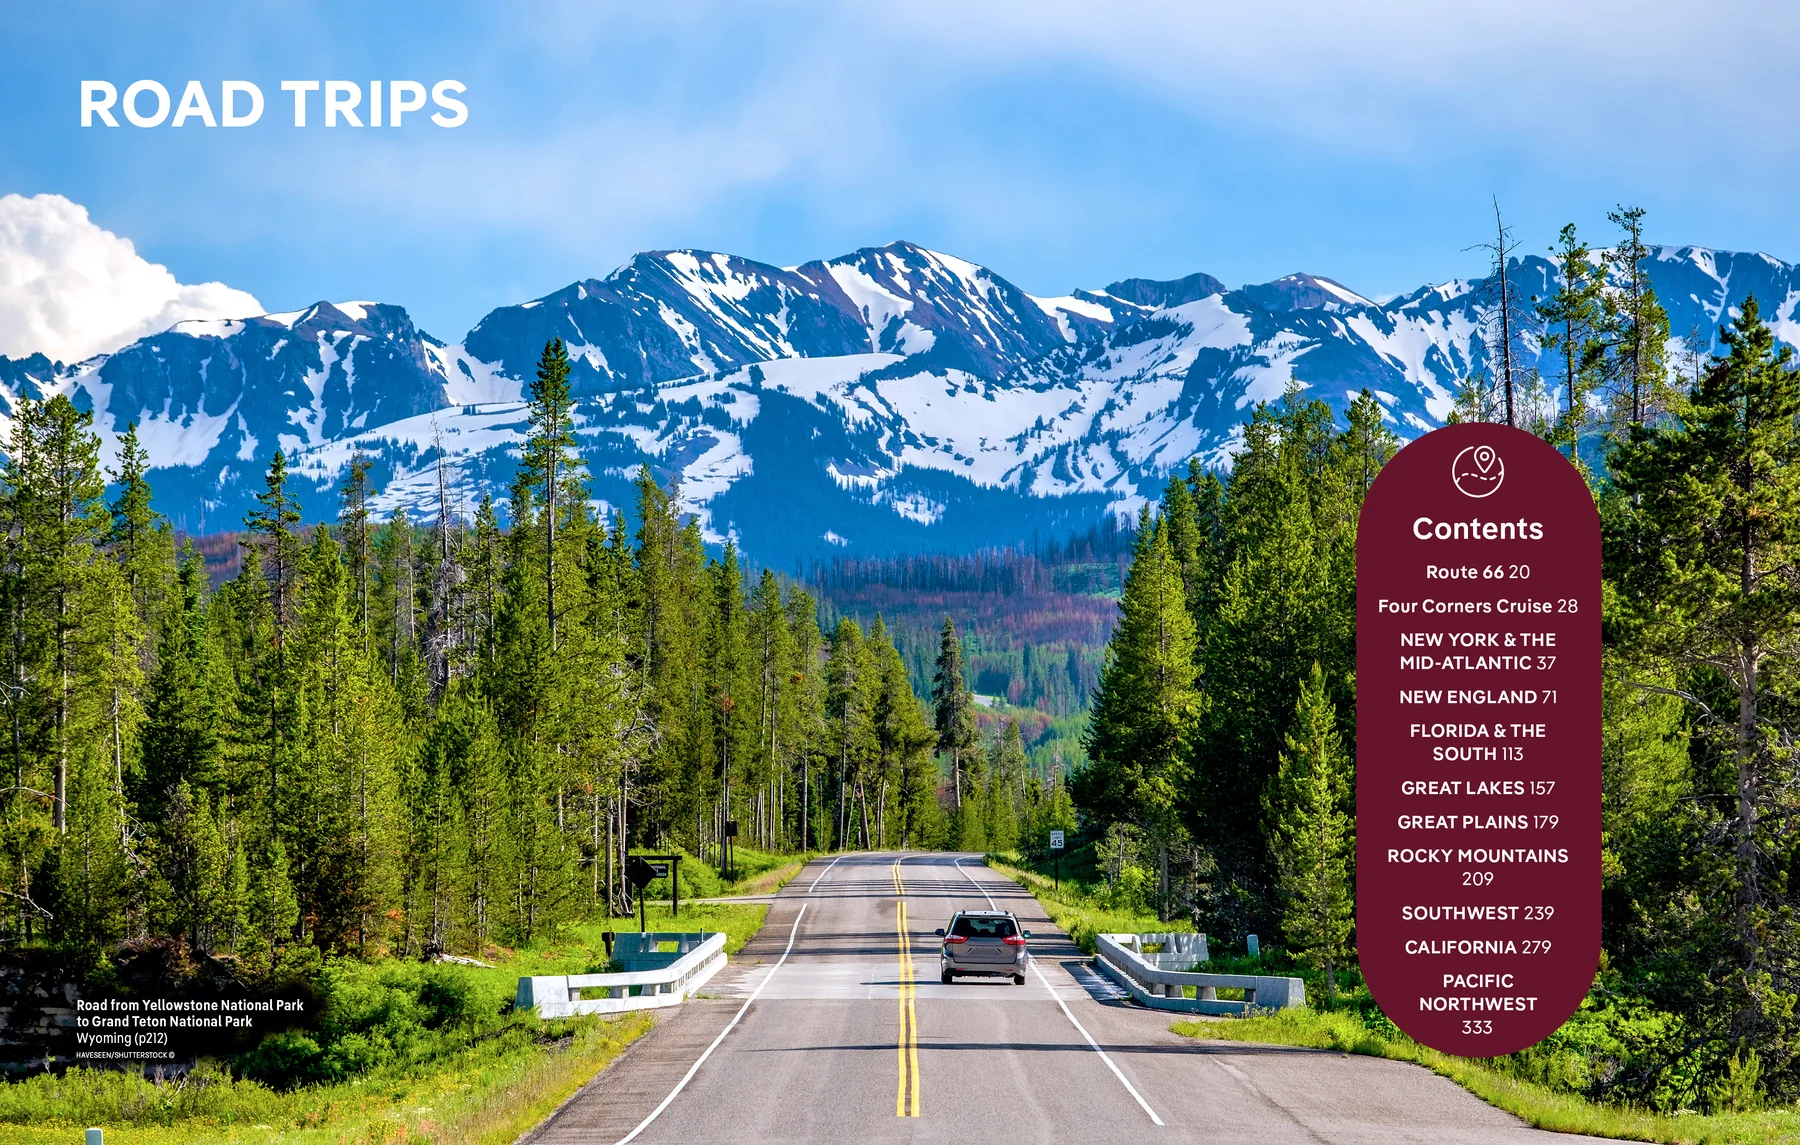 USA's Best Road Trips